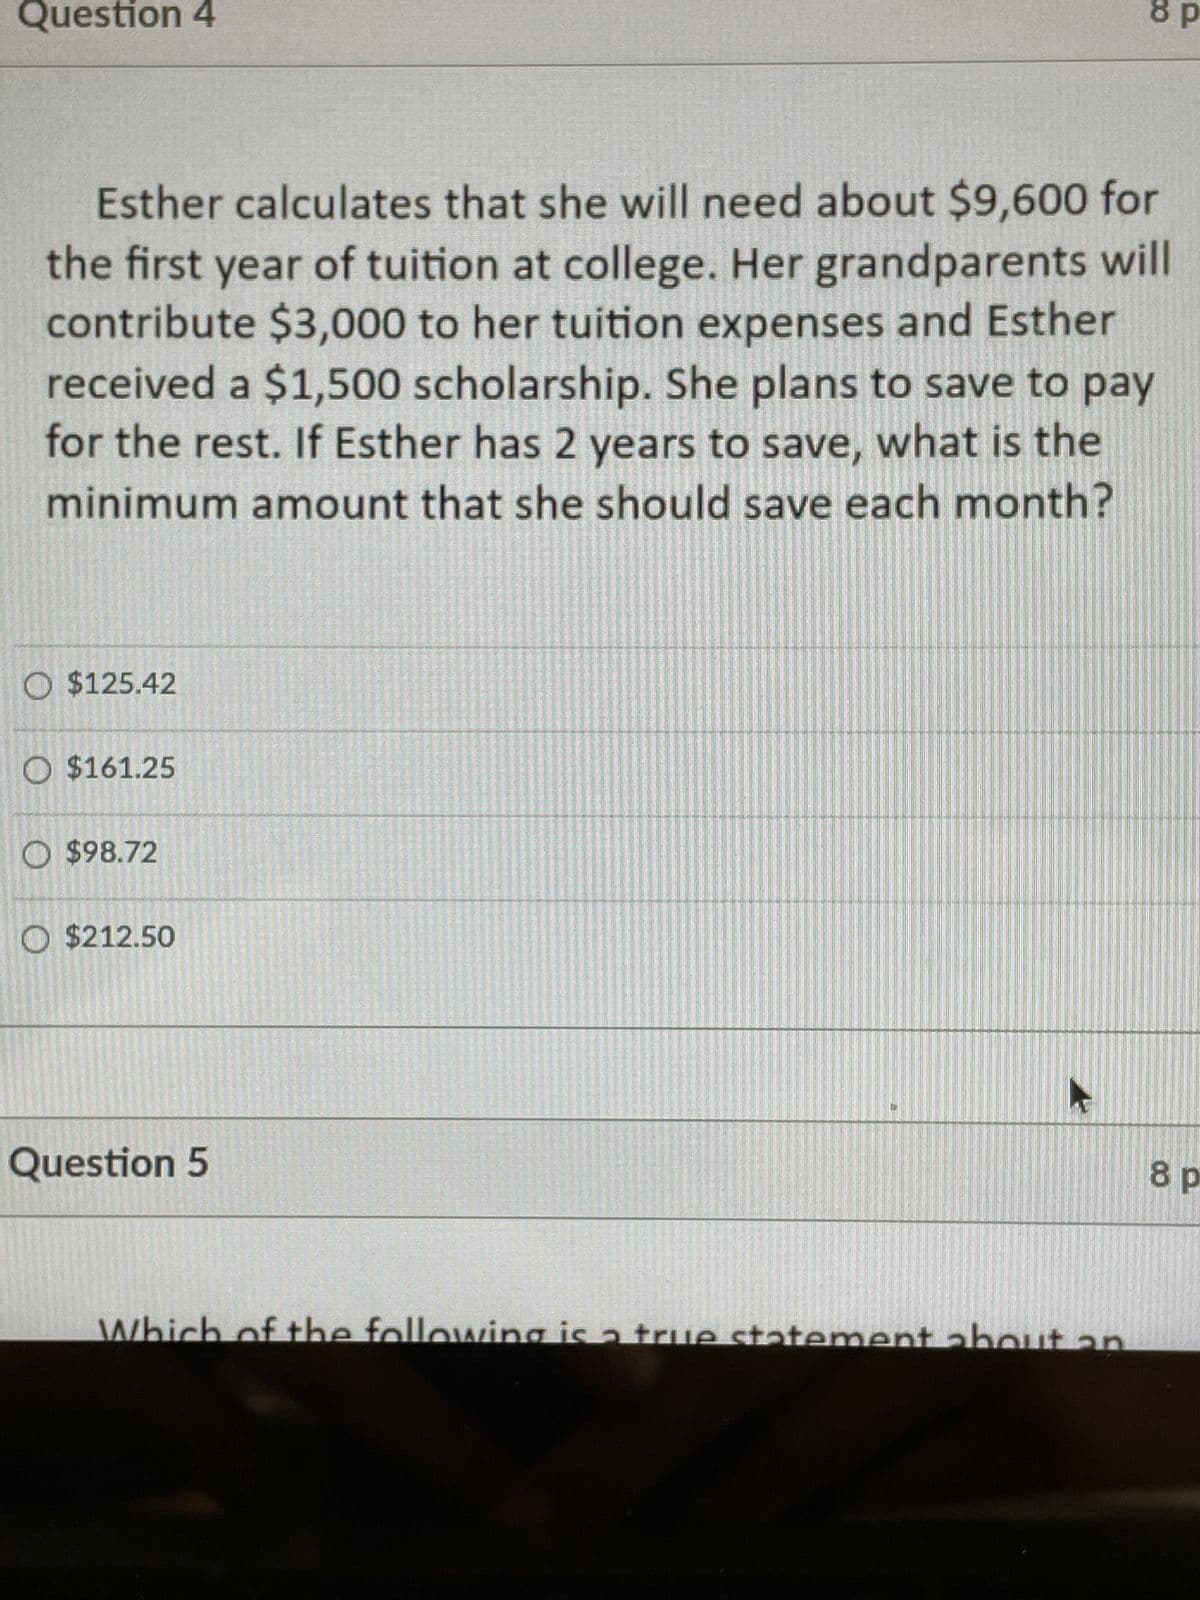 Question 4
8 p
Esther calculates that she will need about $9,600 for
the first year of tuition at college. Her grandparents will
contribute $3,000 to her tuition expenses and Esther
received a $1,500 scholarship. She plans to save to pay
for the rest. If Esther has 2 years to save, what is the
minimum amount that she should save each month?
O $125.42
O $161.25
O $98.72
O $212.50
Question 5
Which of the following is a true statement about an
8 p